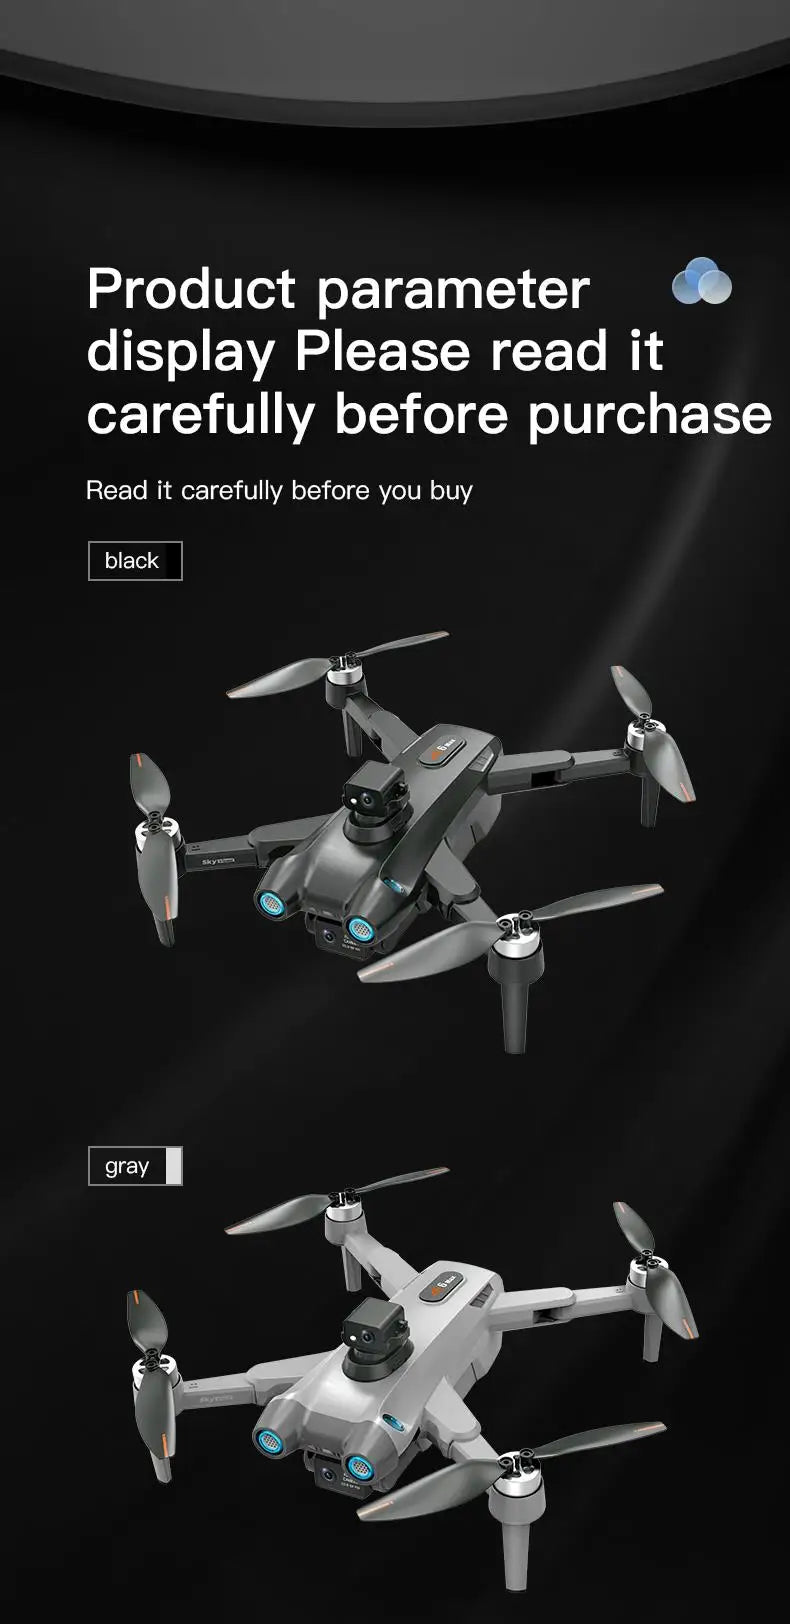 AE6 Max Drone, Product parameter display Please read it carefully before purchase Black gray buy .